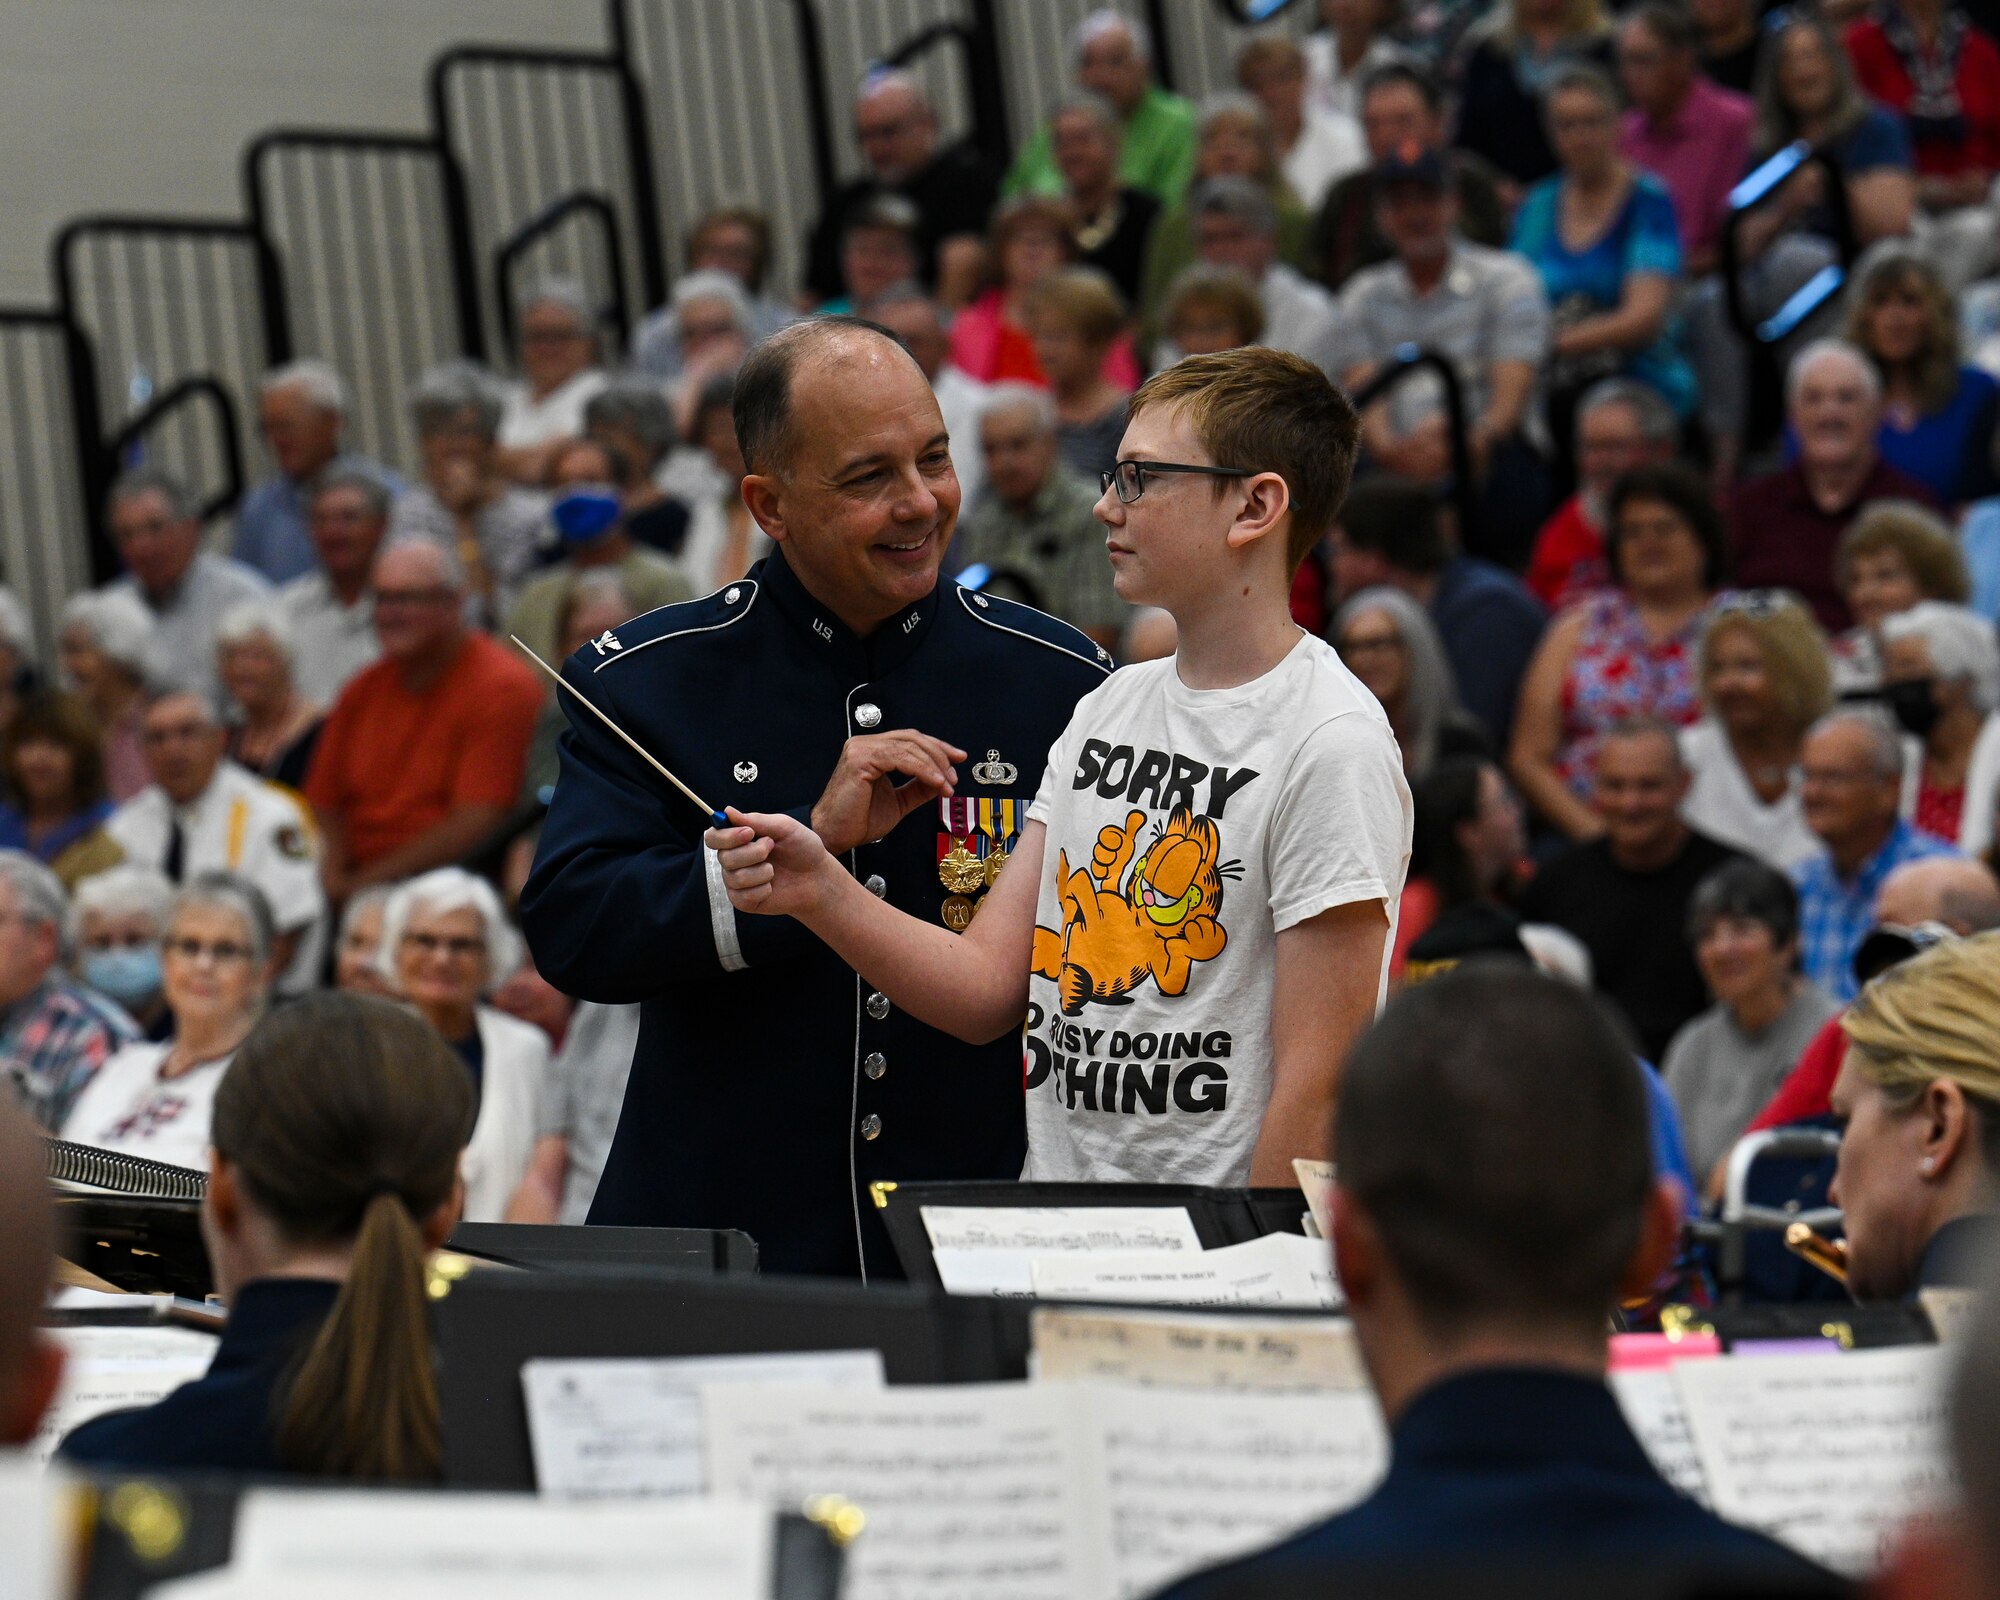 U.S. Air Force Col. Don Schofield, commander and conductor of The United States Air Force Band, teaches a local student how to conduct a band at Paris, Ind., July 3, 2022. The Concert Band performs a wide variety of music ranging from classical transcriptions and original works to solo features, light classics, popular favorites, and patriotic selections. (U.S. Air Force photo by Airman Bill Guilliam)